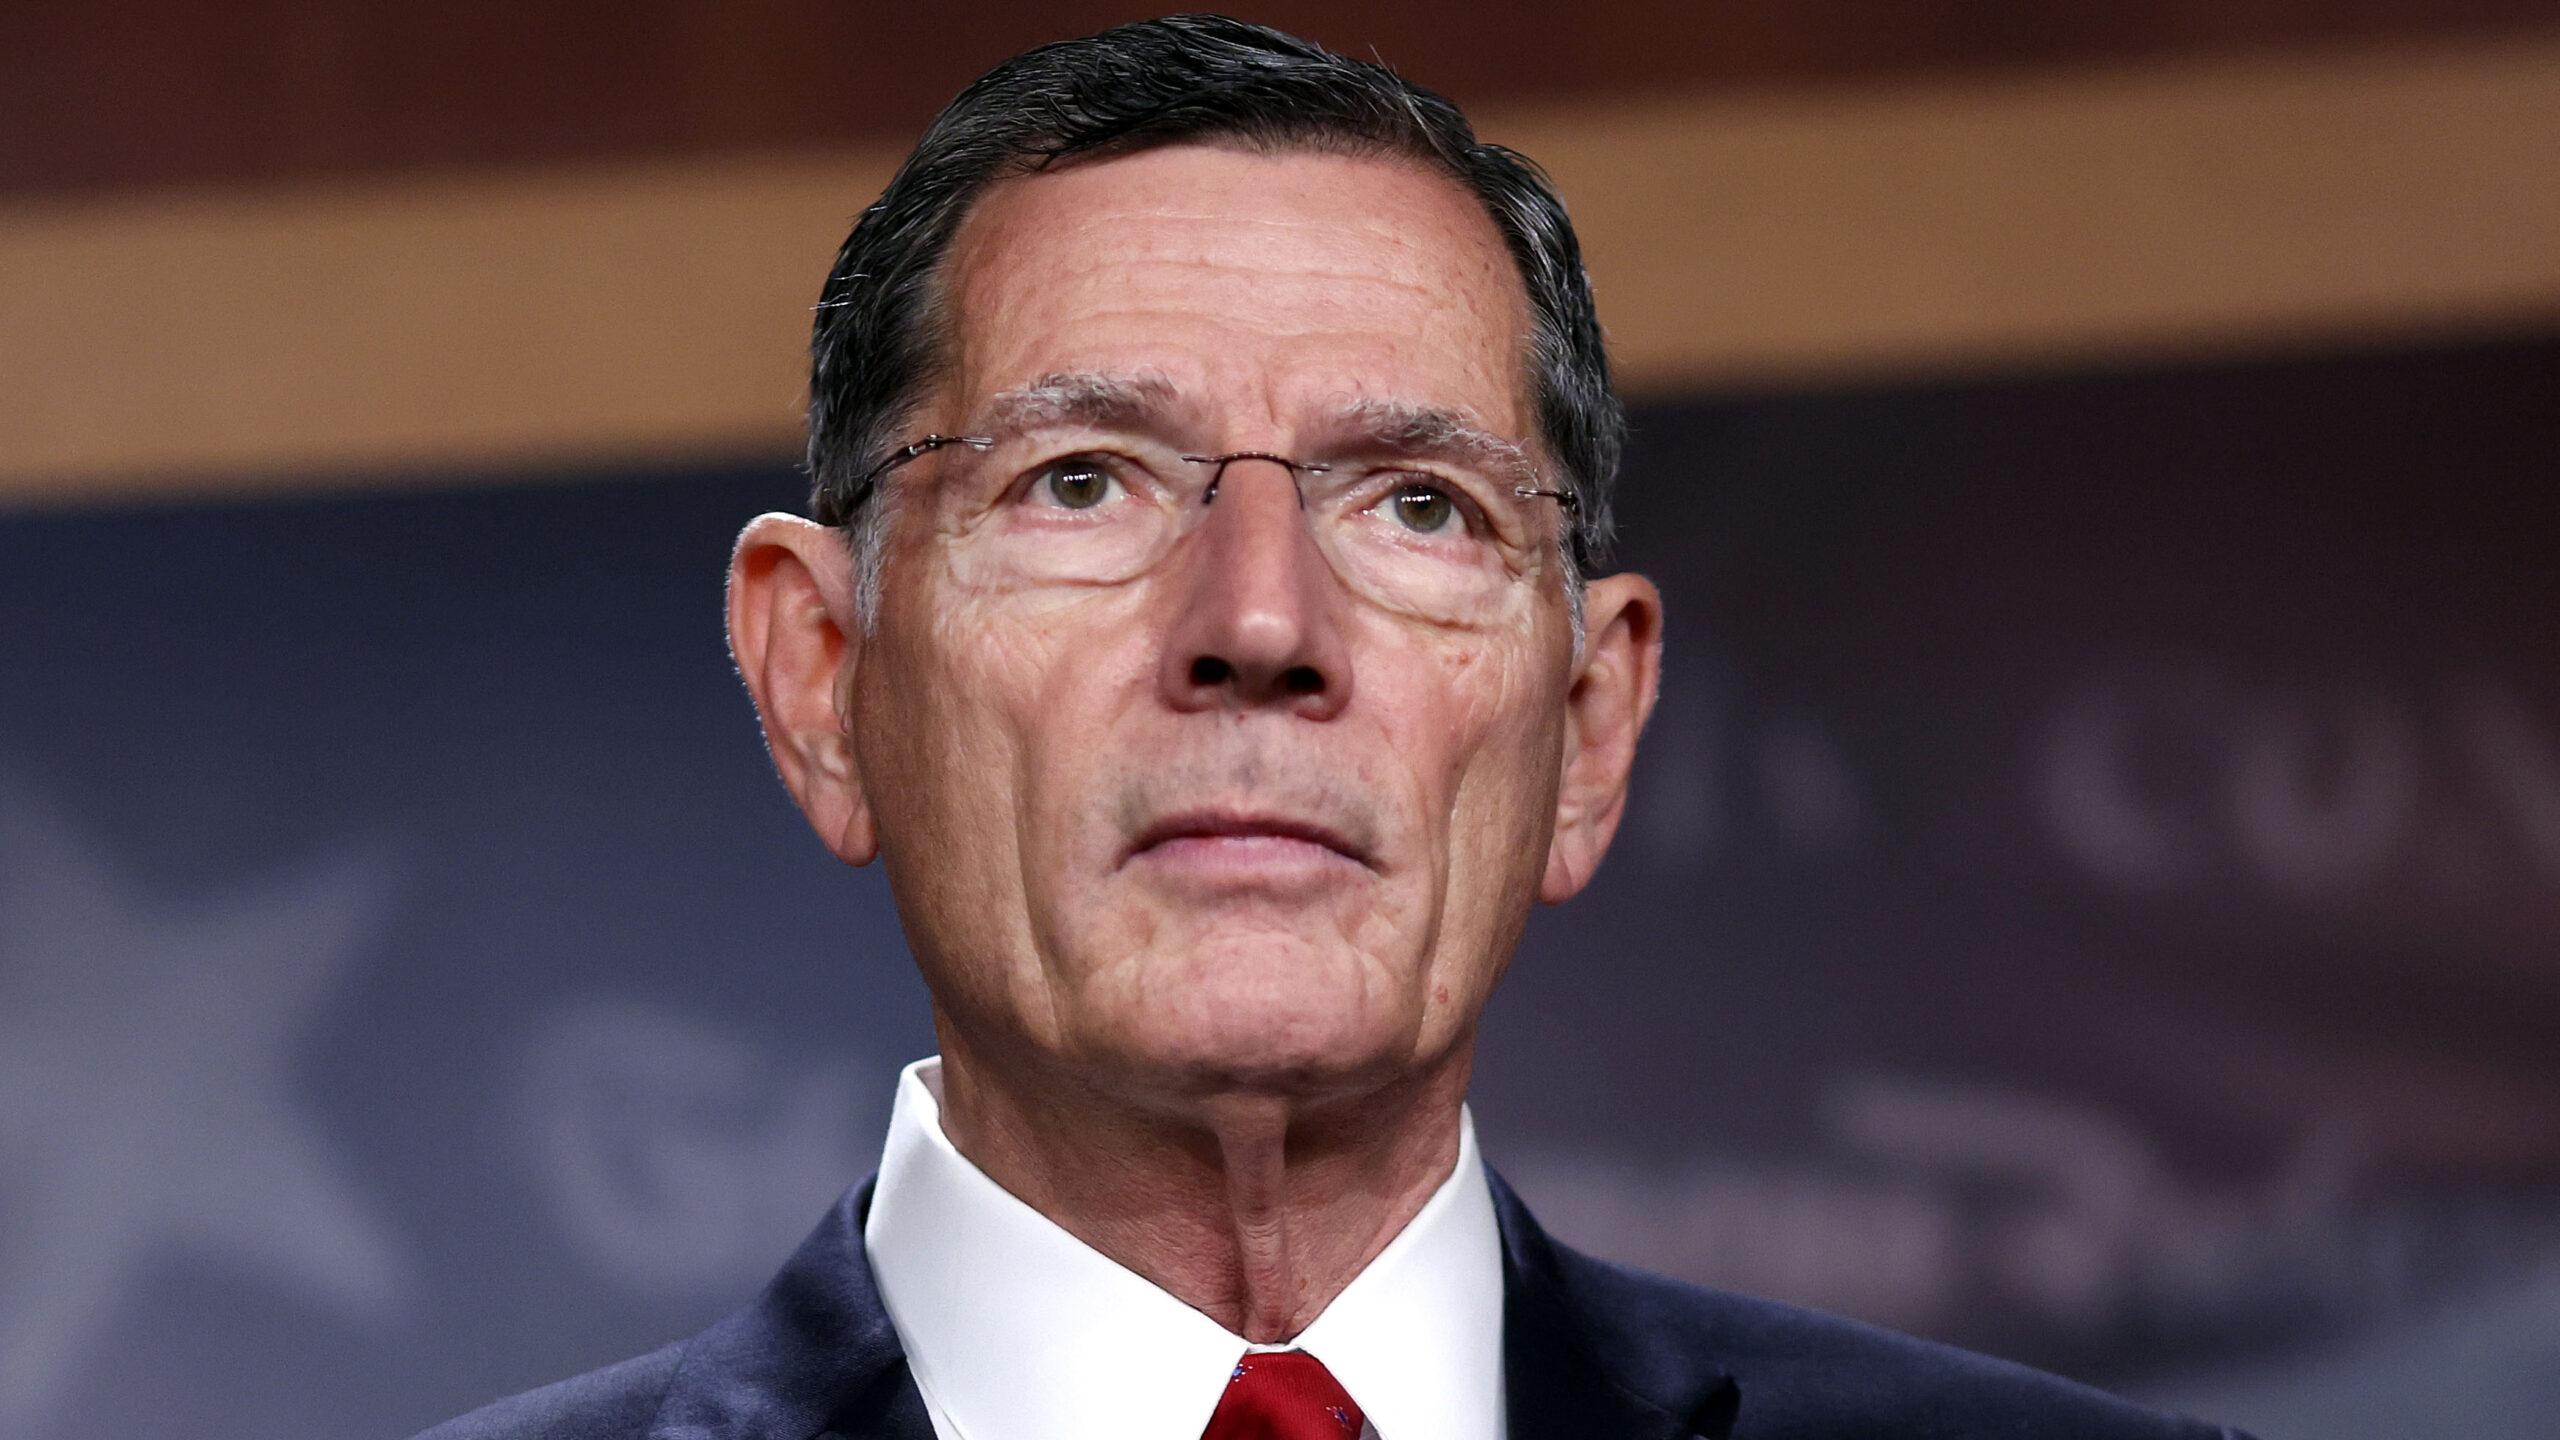 Senator Barrasso advocates for the dismissal of university leaders and withdrawal of federal funding due to pro-Hamas demonstrations